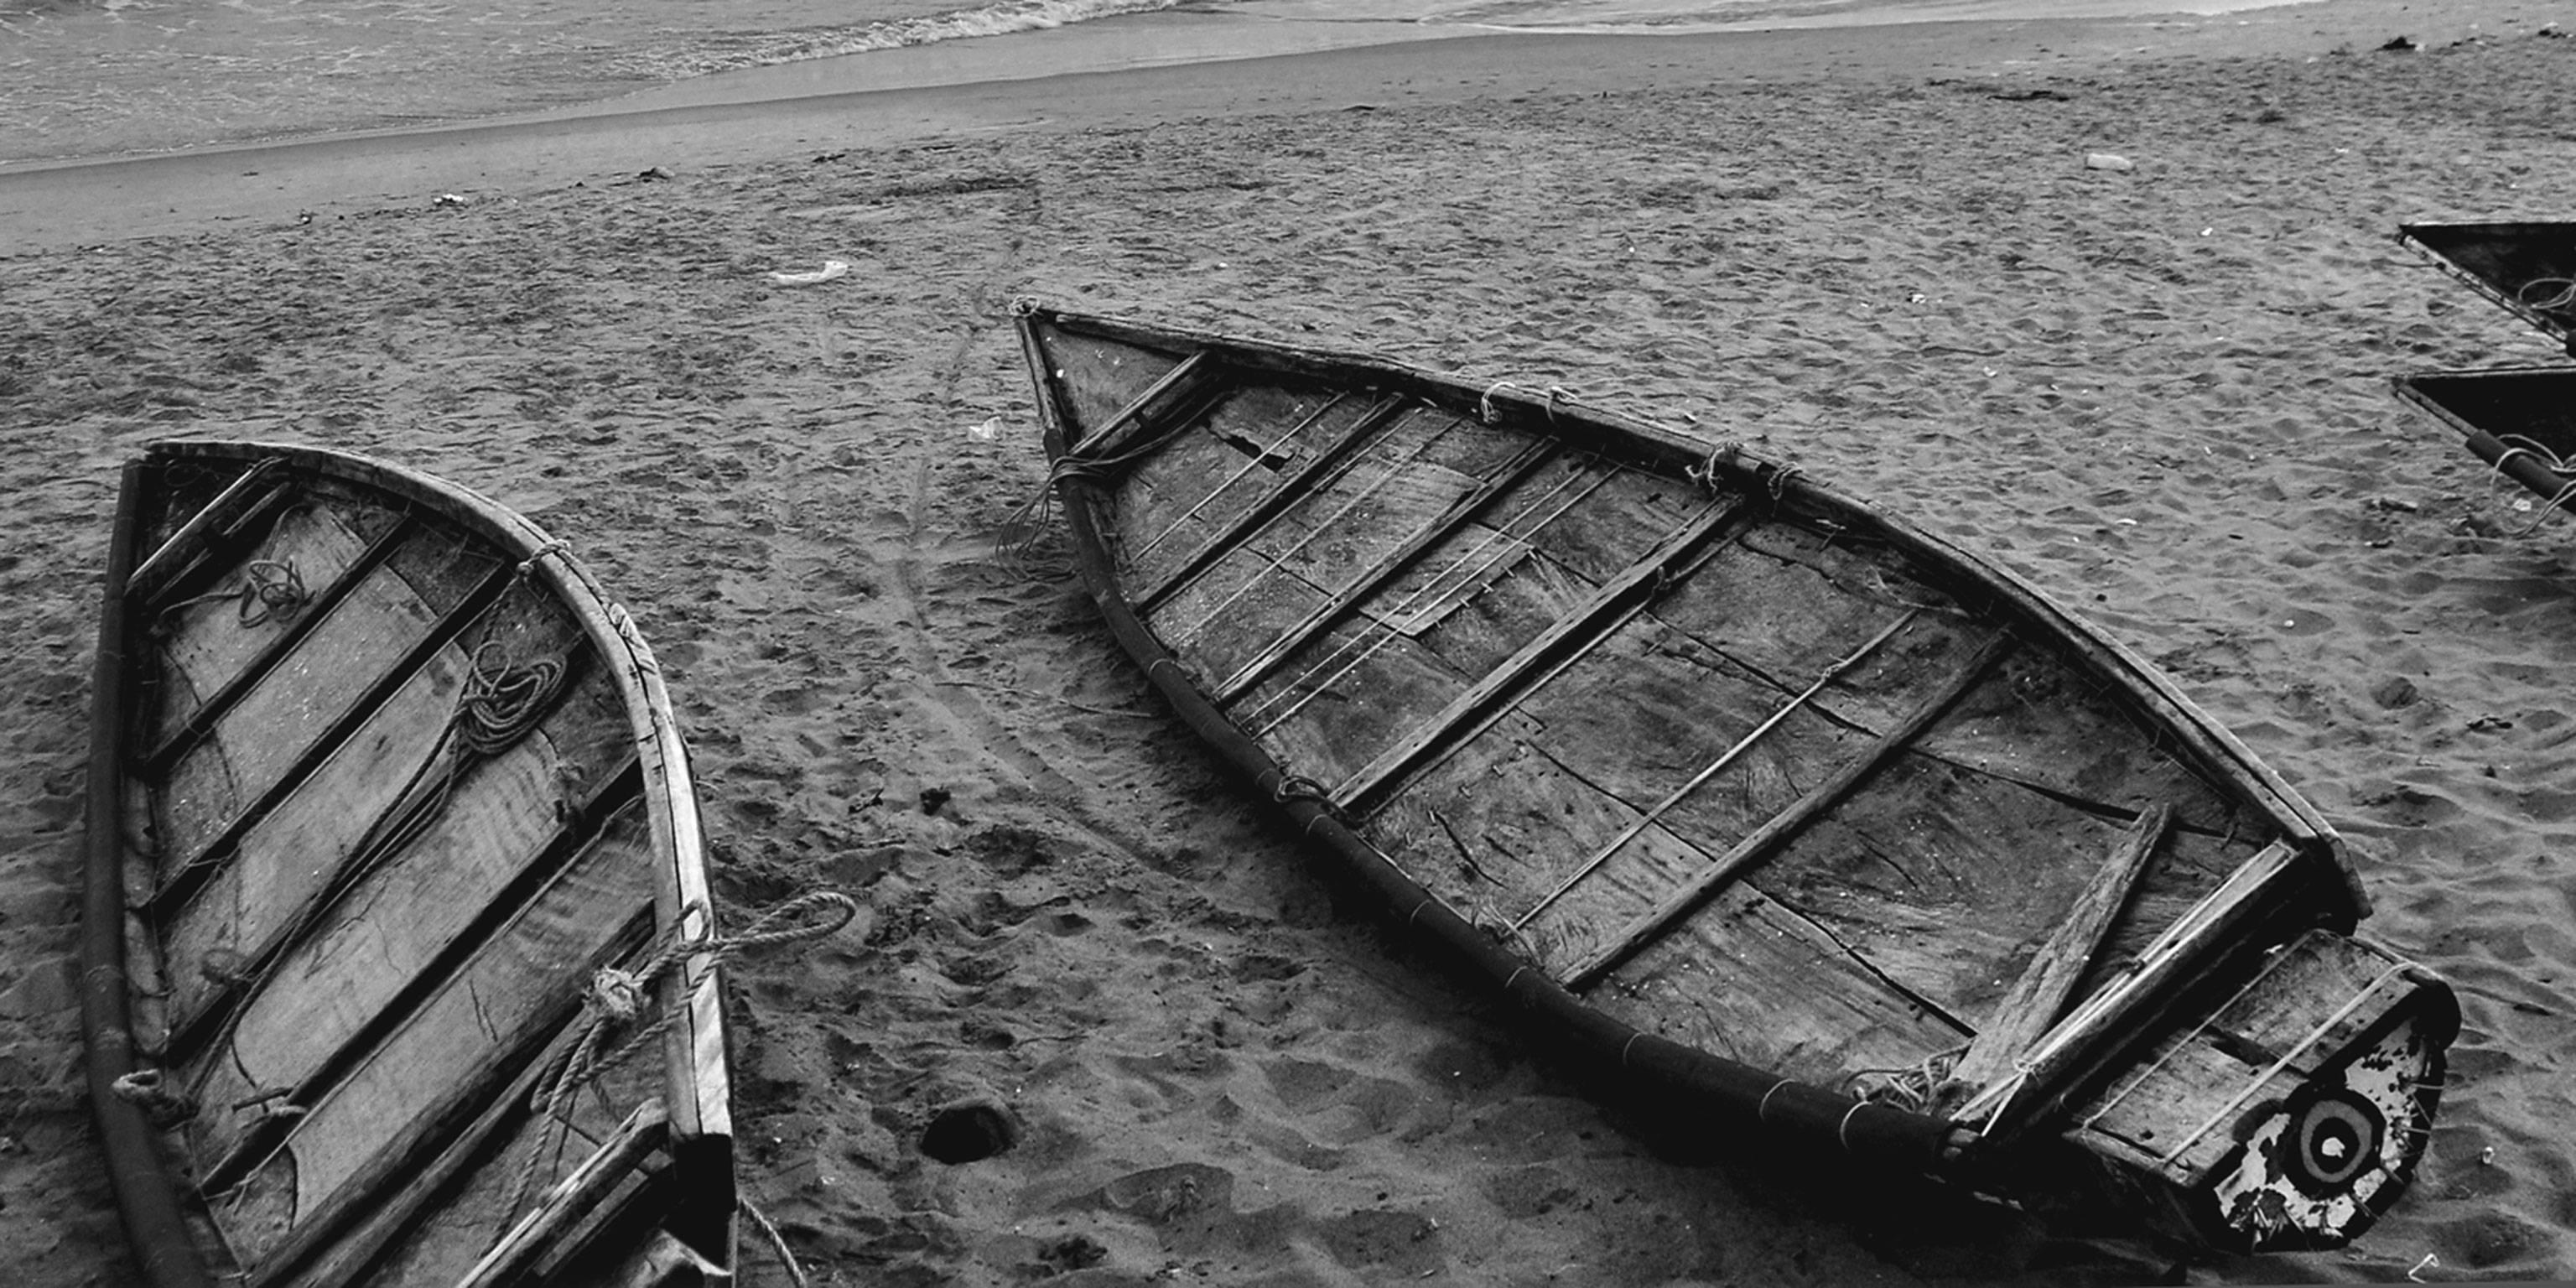 Boats, Sea Beach, Black & White Photography by Indian Artist 